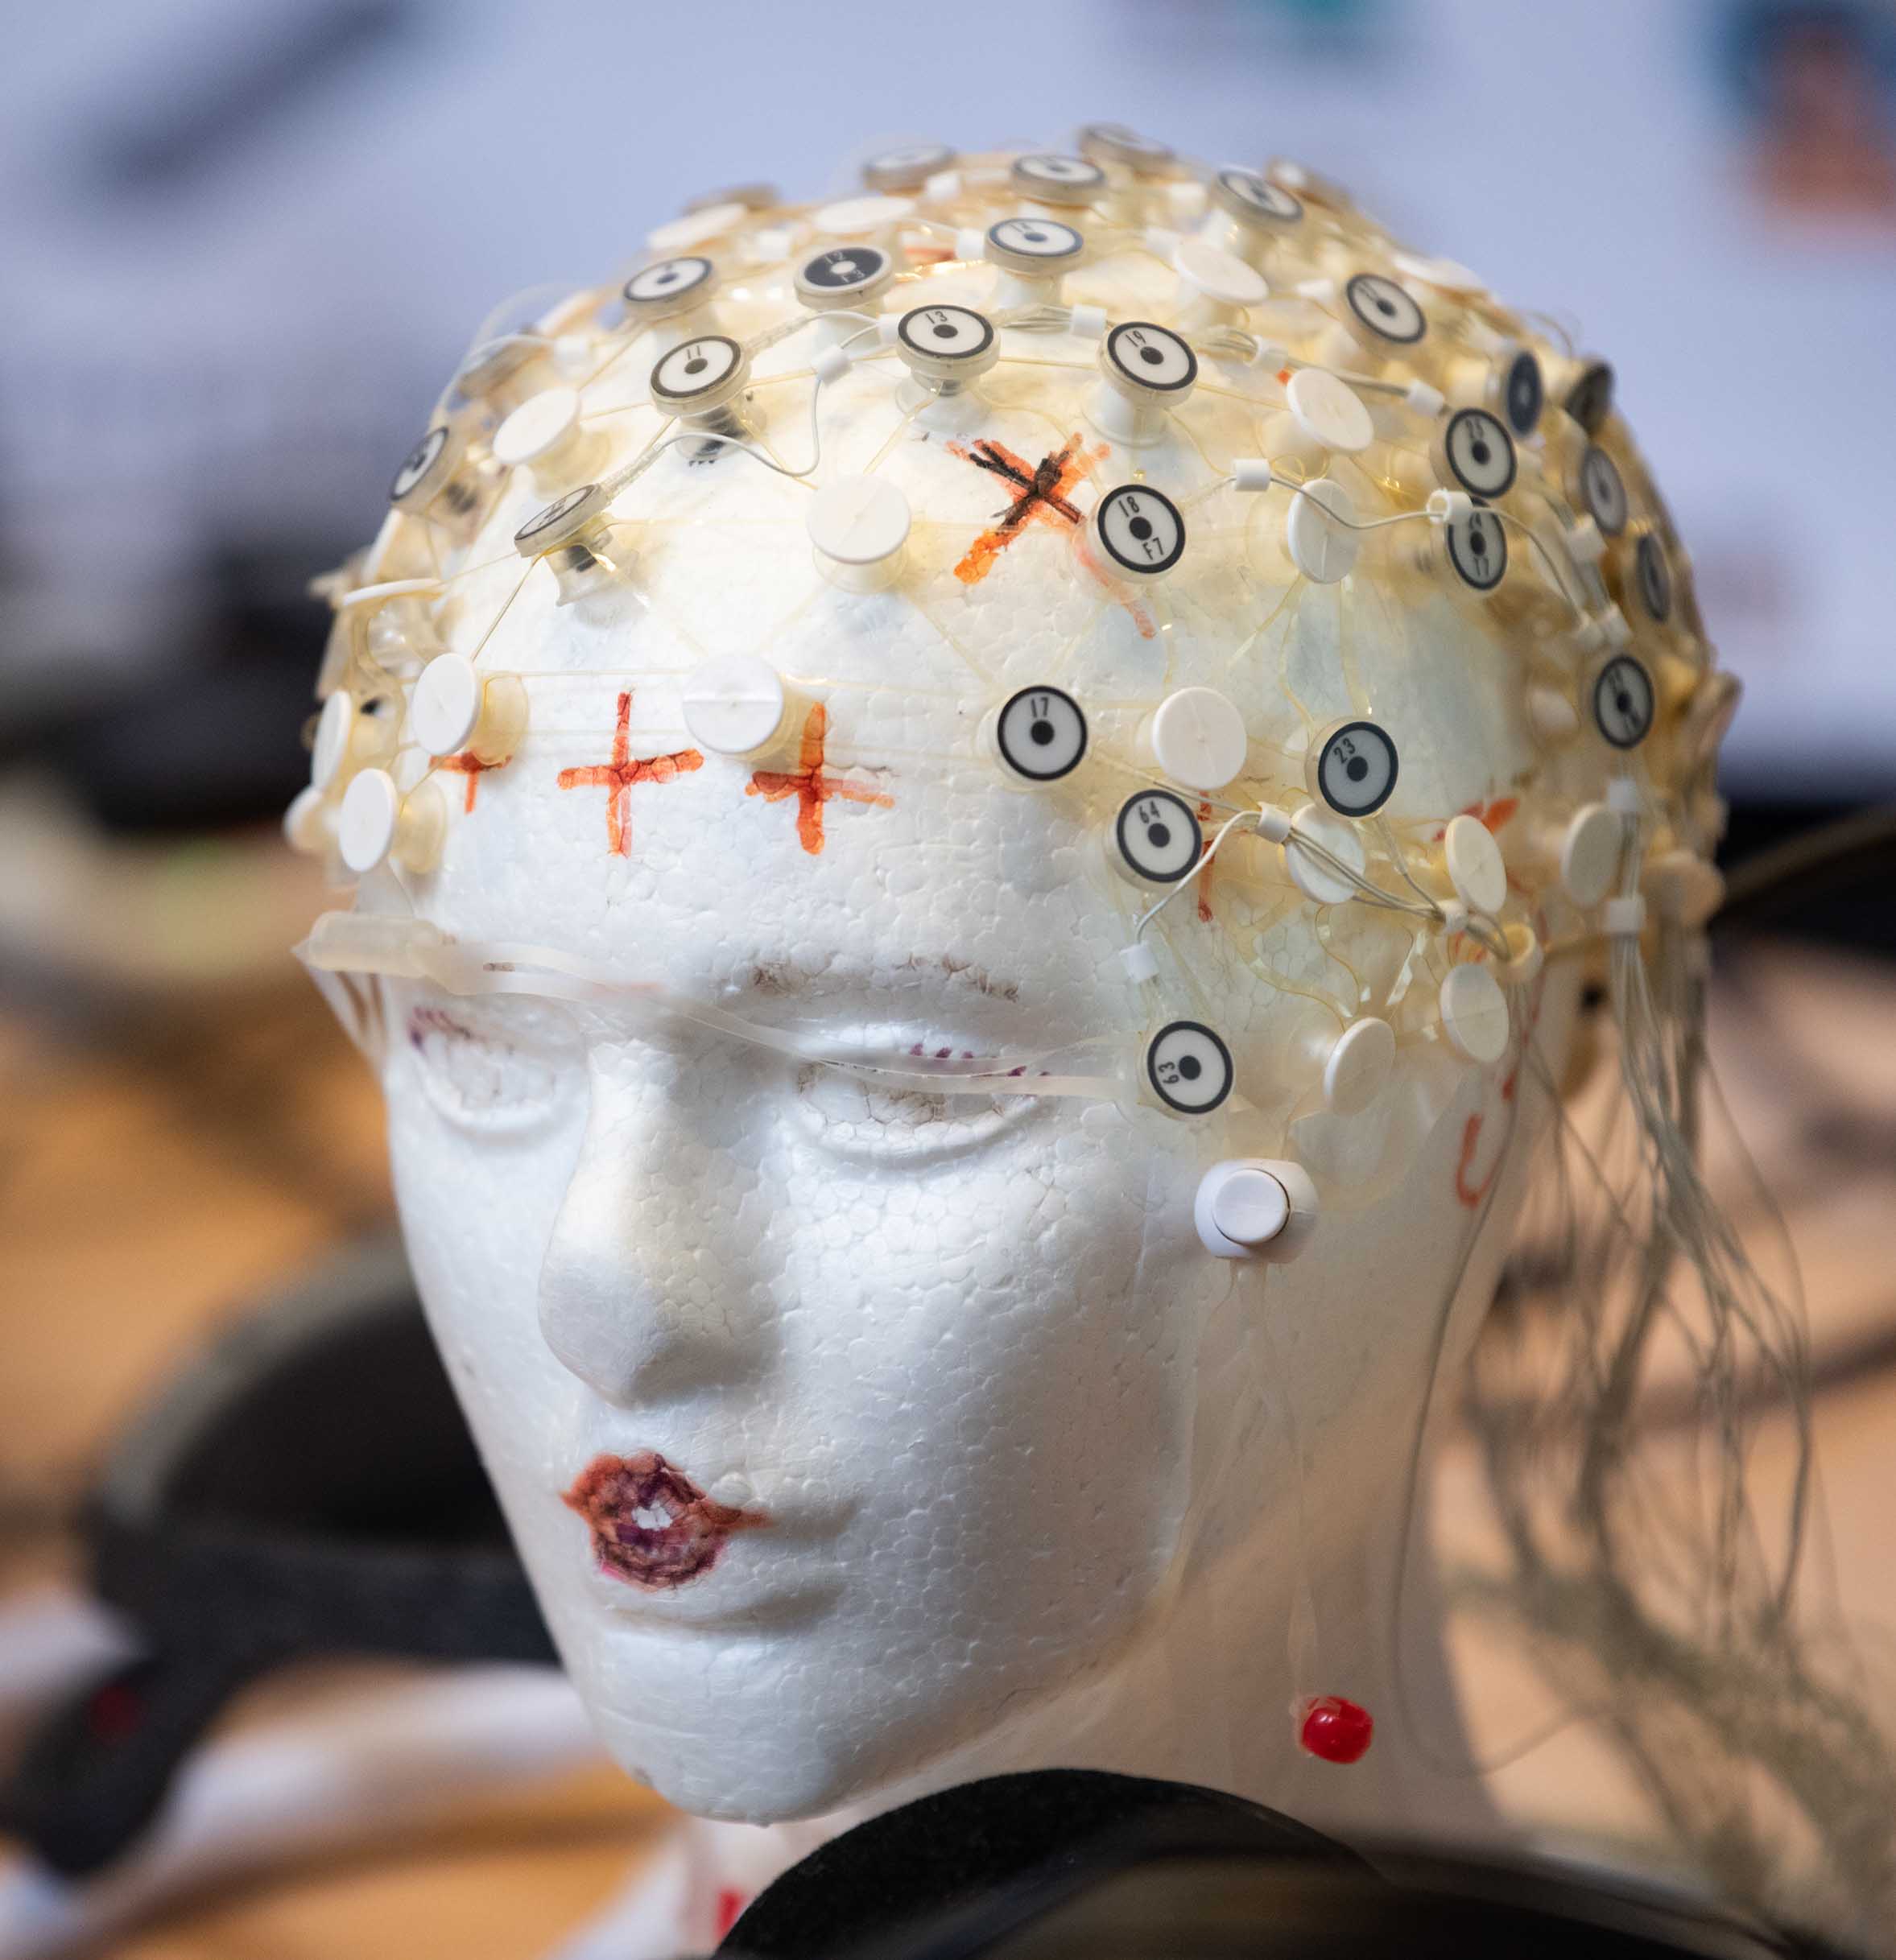 Sensory electrodes placed on replica human head